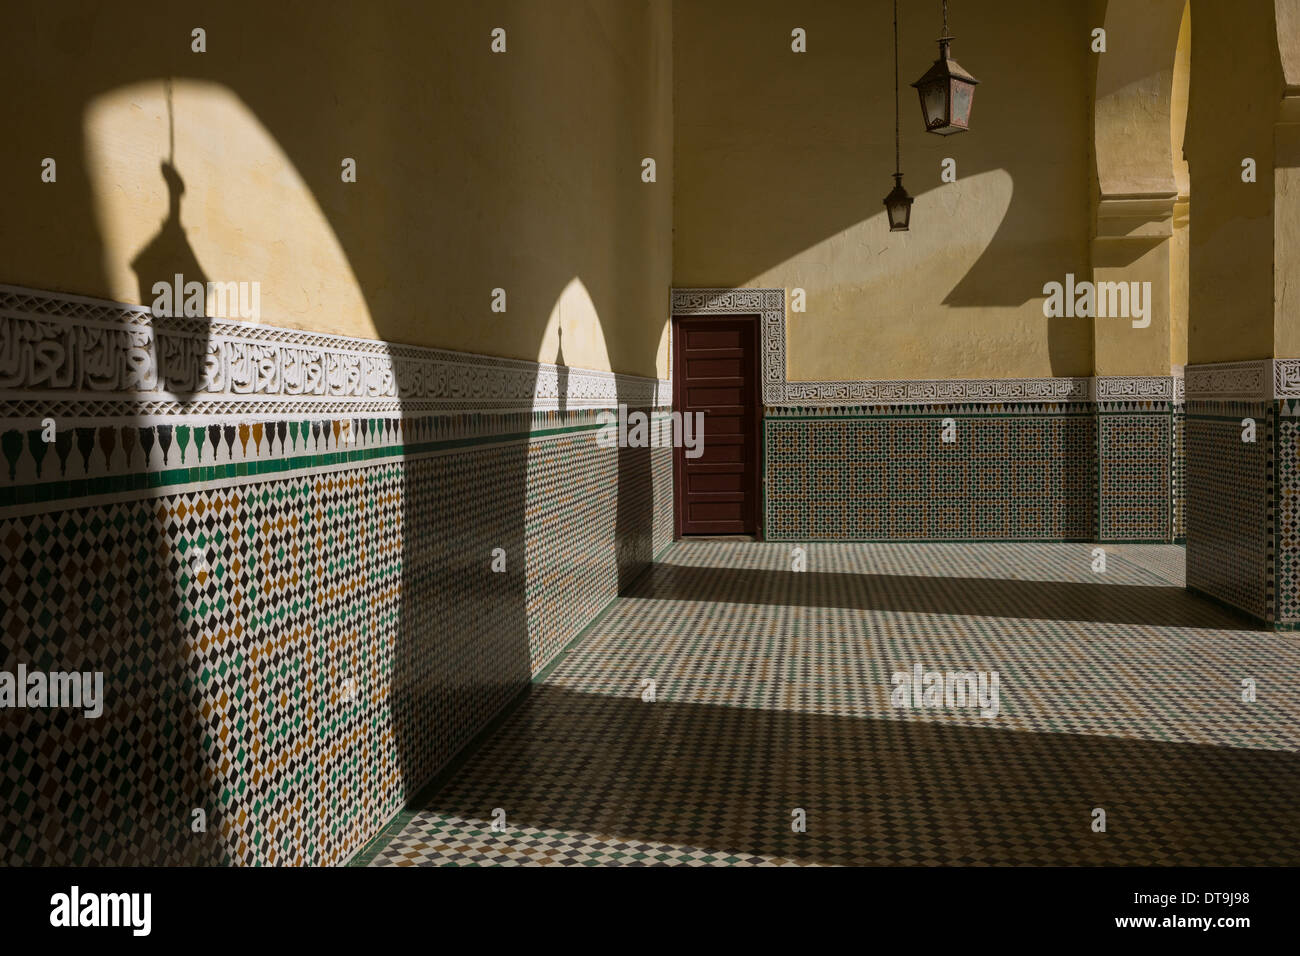 Shadows falling on tiling in the Tomb of Sultan Moulay Ismail, Meknes, Morocco Stock Photo